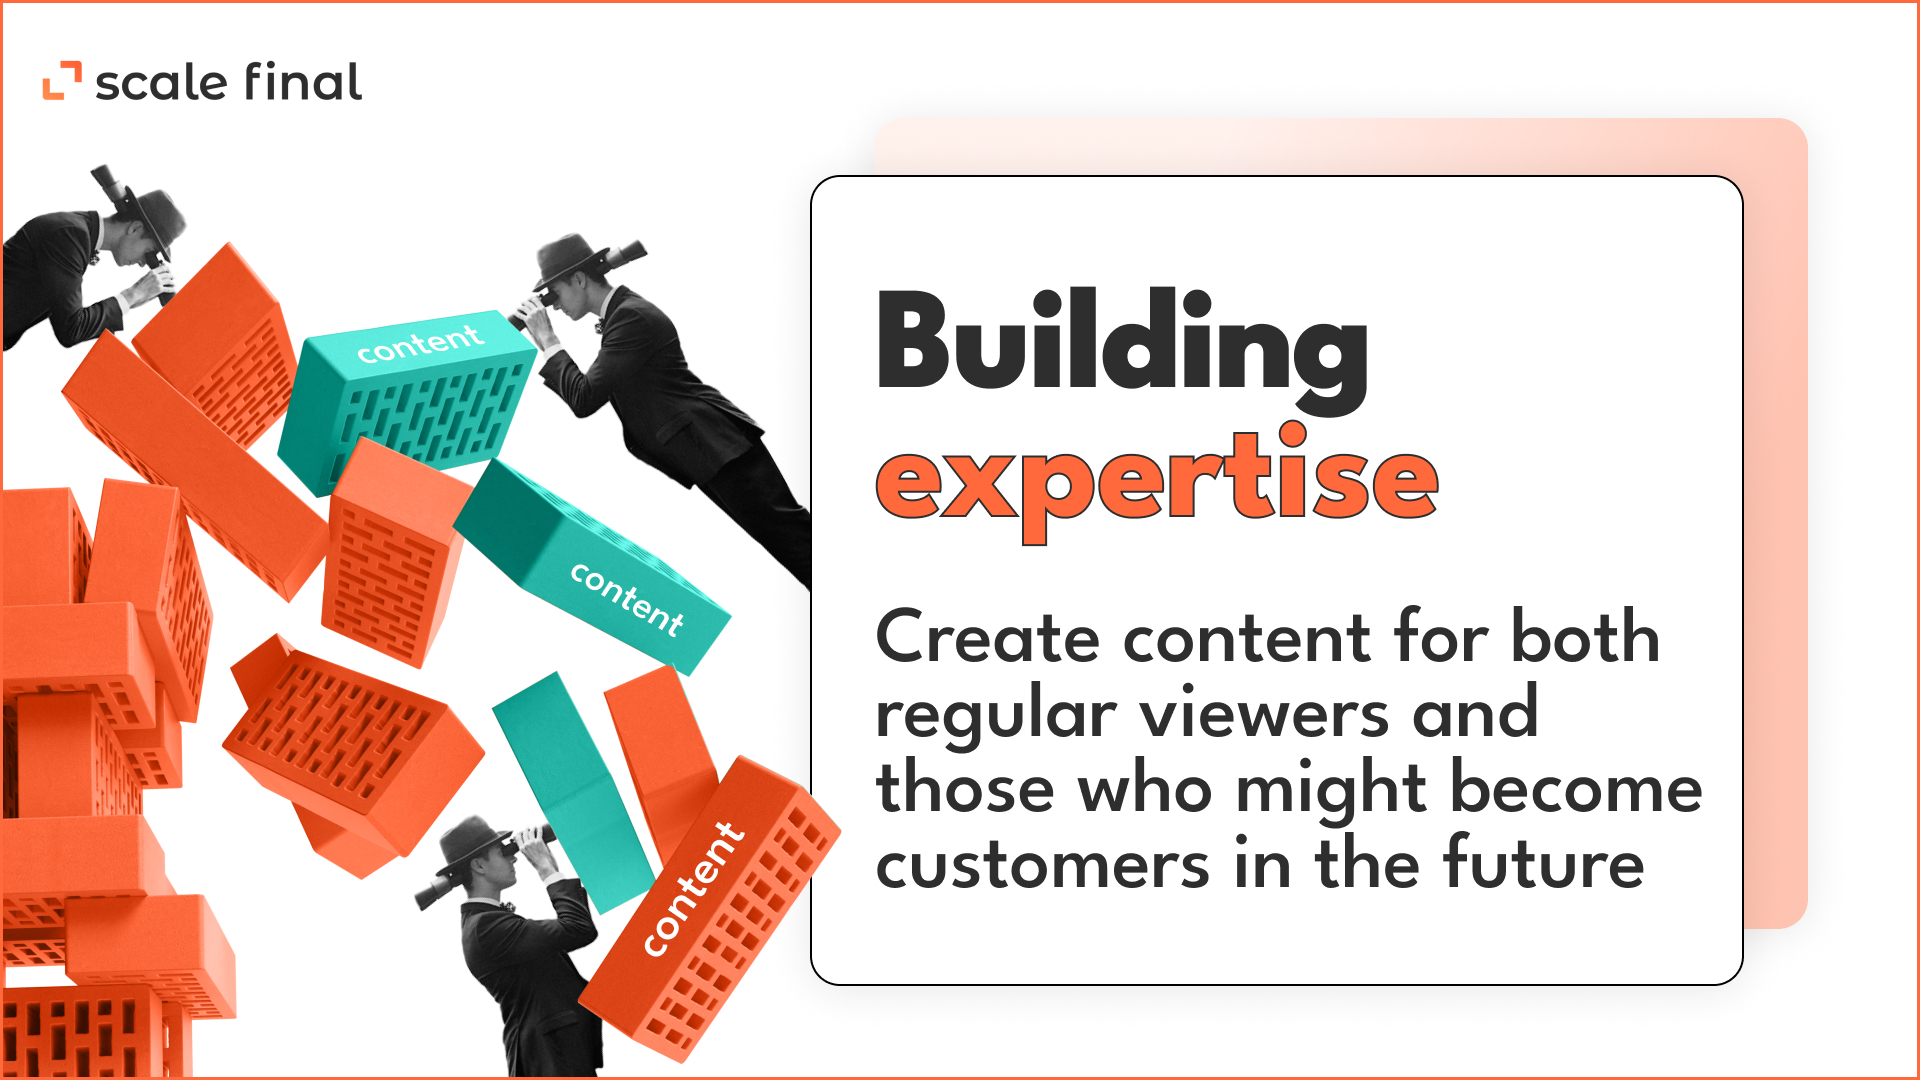 Building expertise Create content for both regular viewers and those who might become customers in the future.